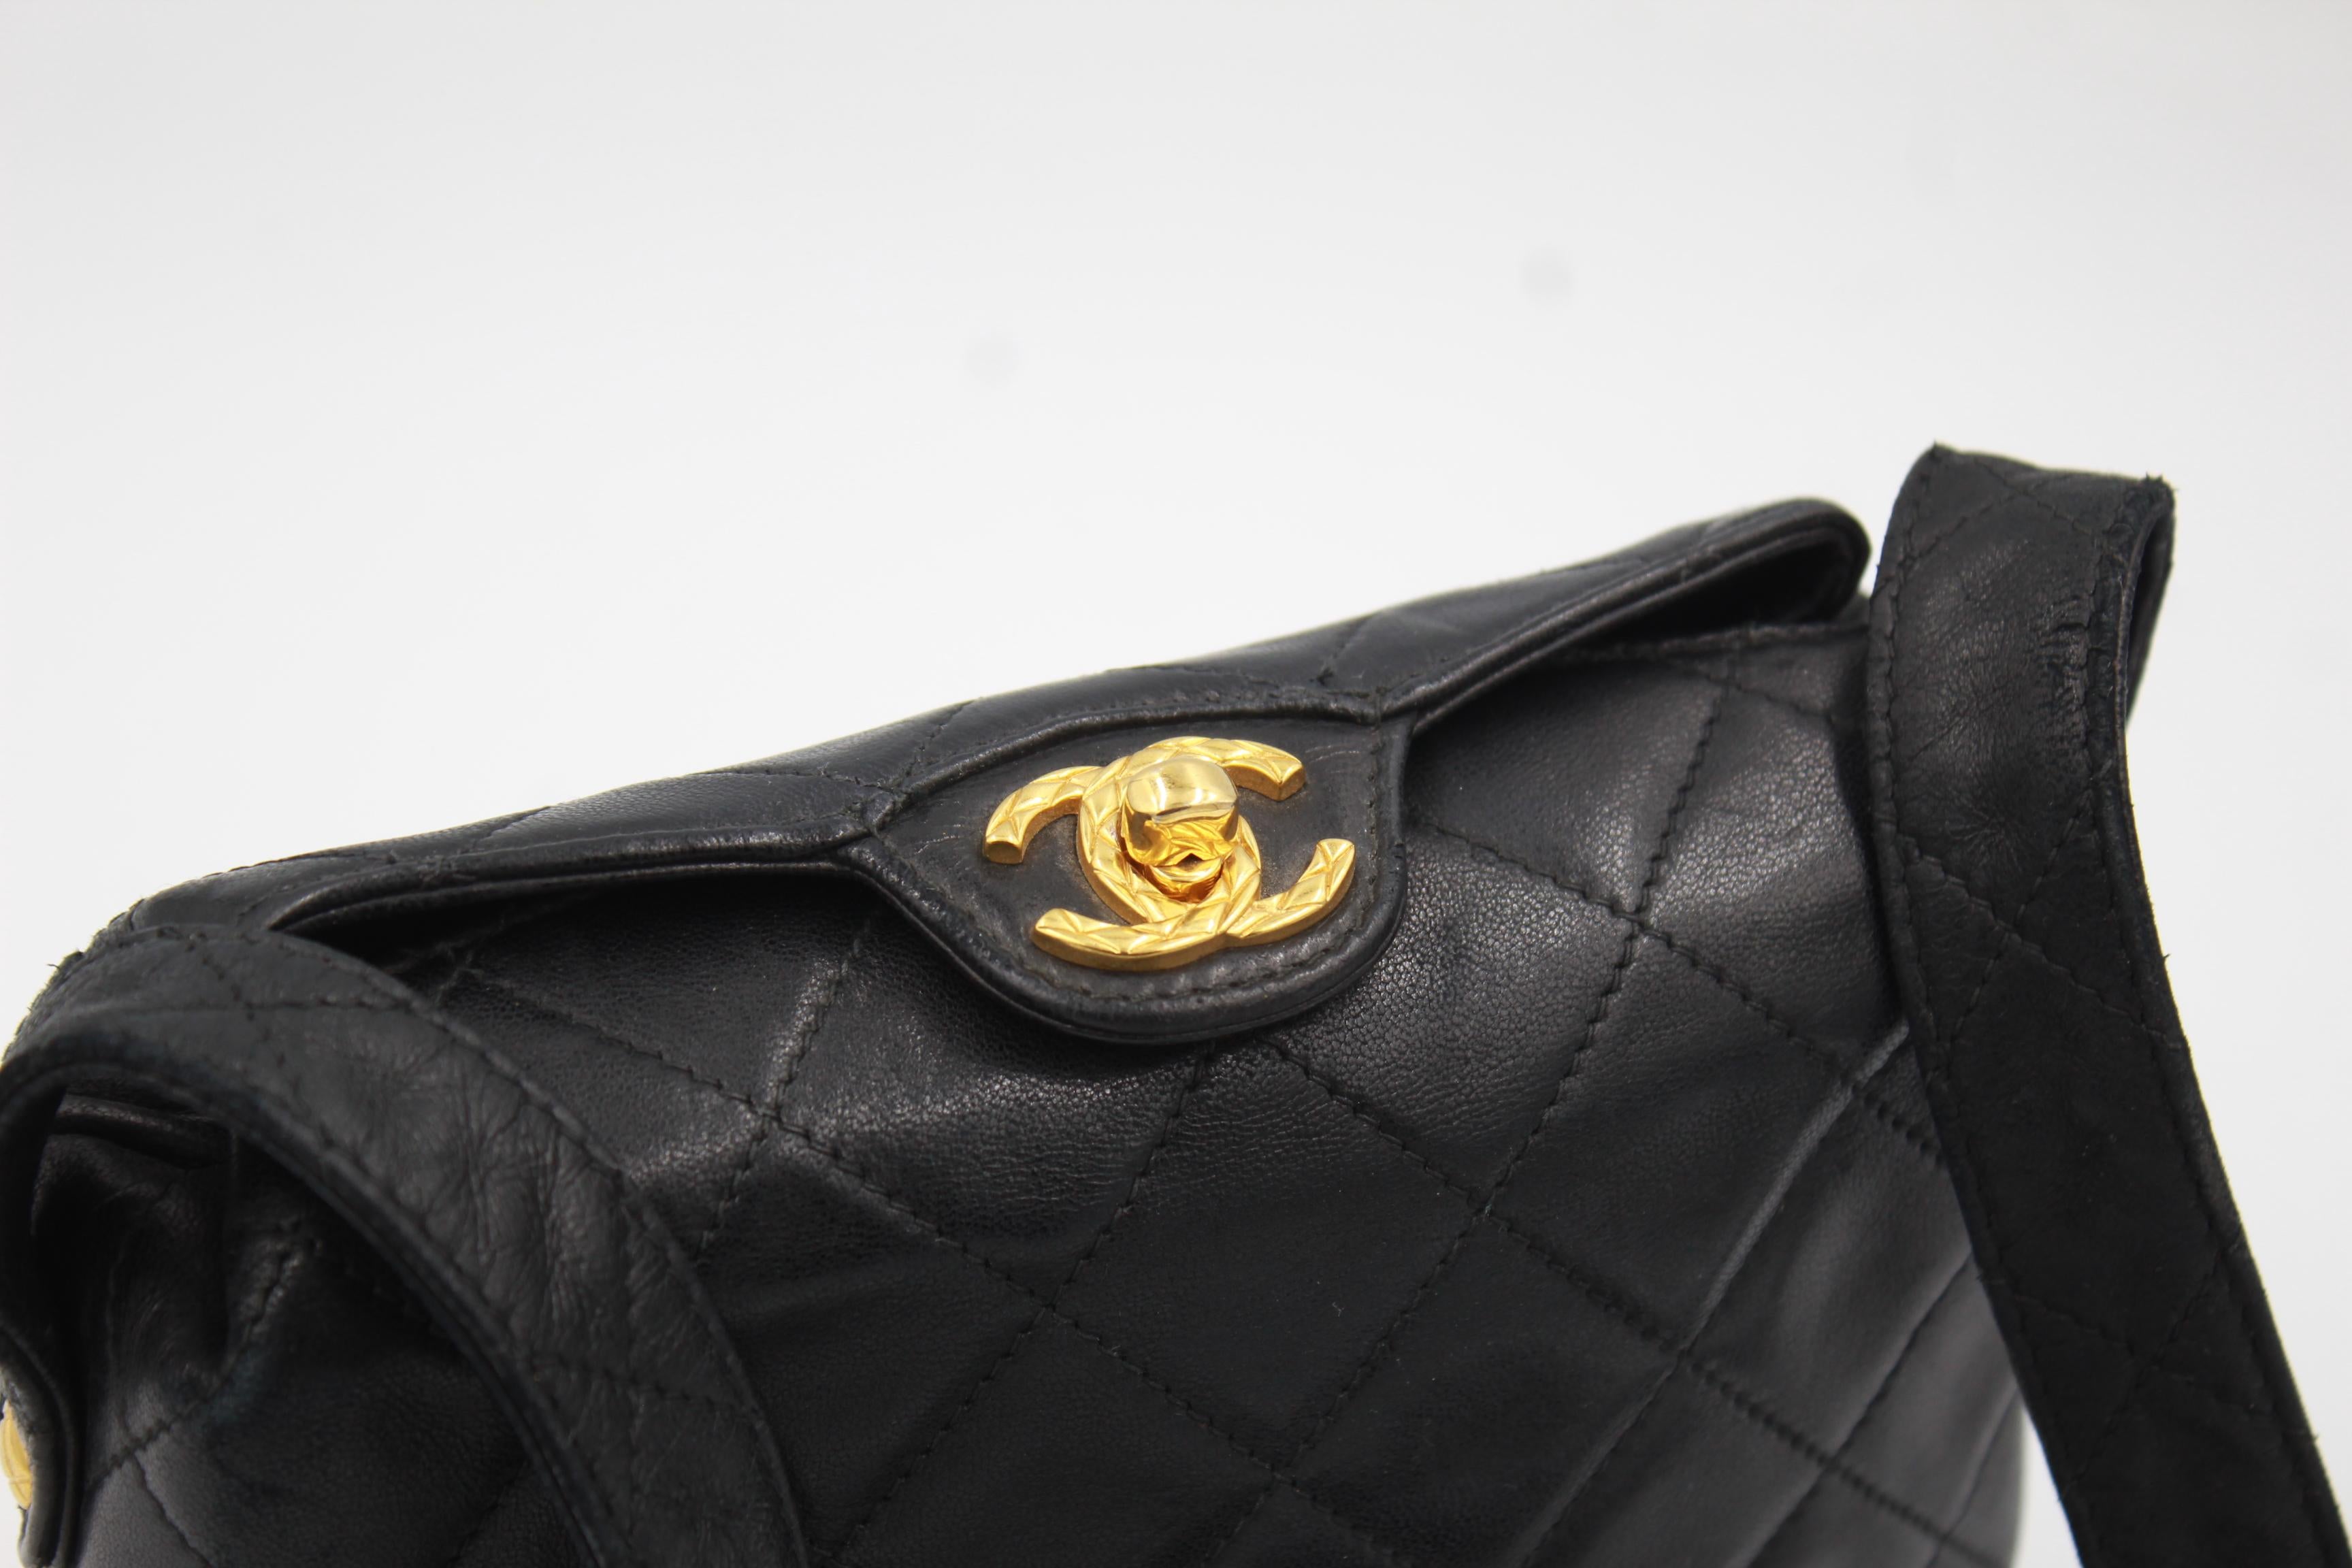 Chanel handbag in blakc lamb leather.
Removable shoulder strap.
Can be wear crossbody.
Good condition, with some light signs of wear ( vintage )
1991 / 1992
Sold with its hologram.